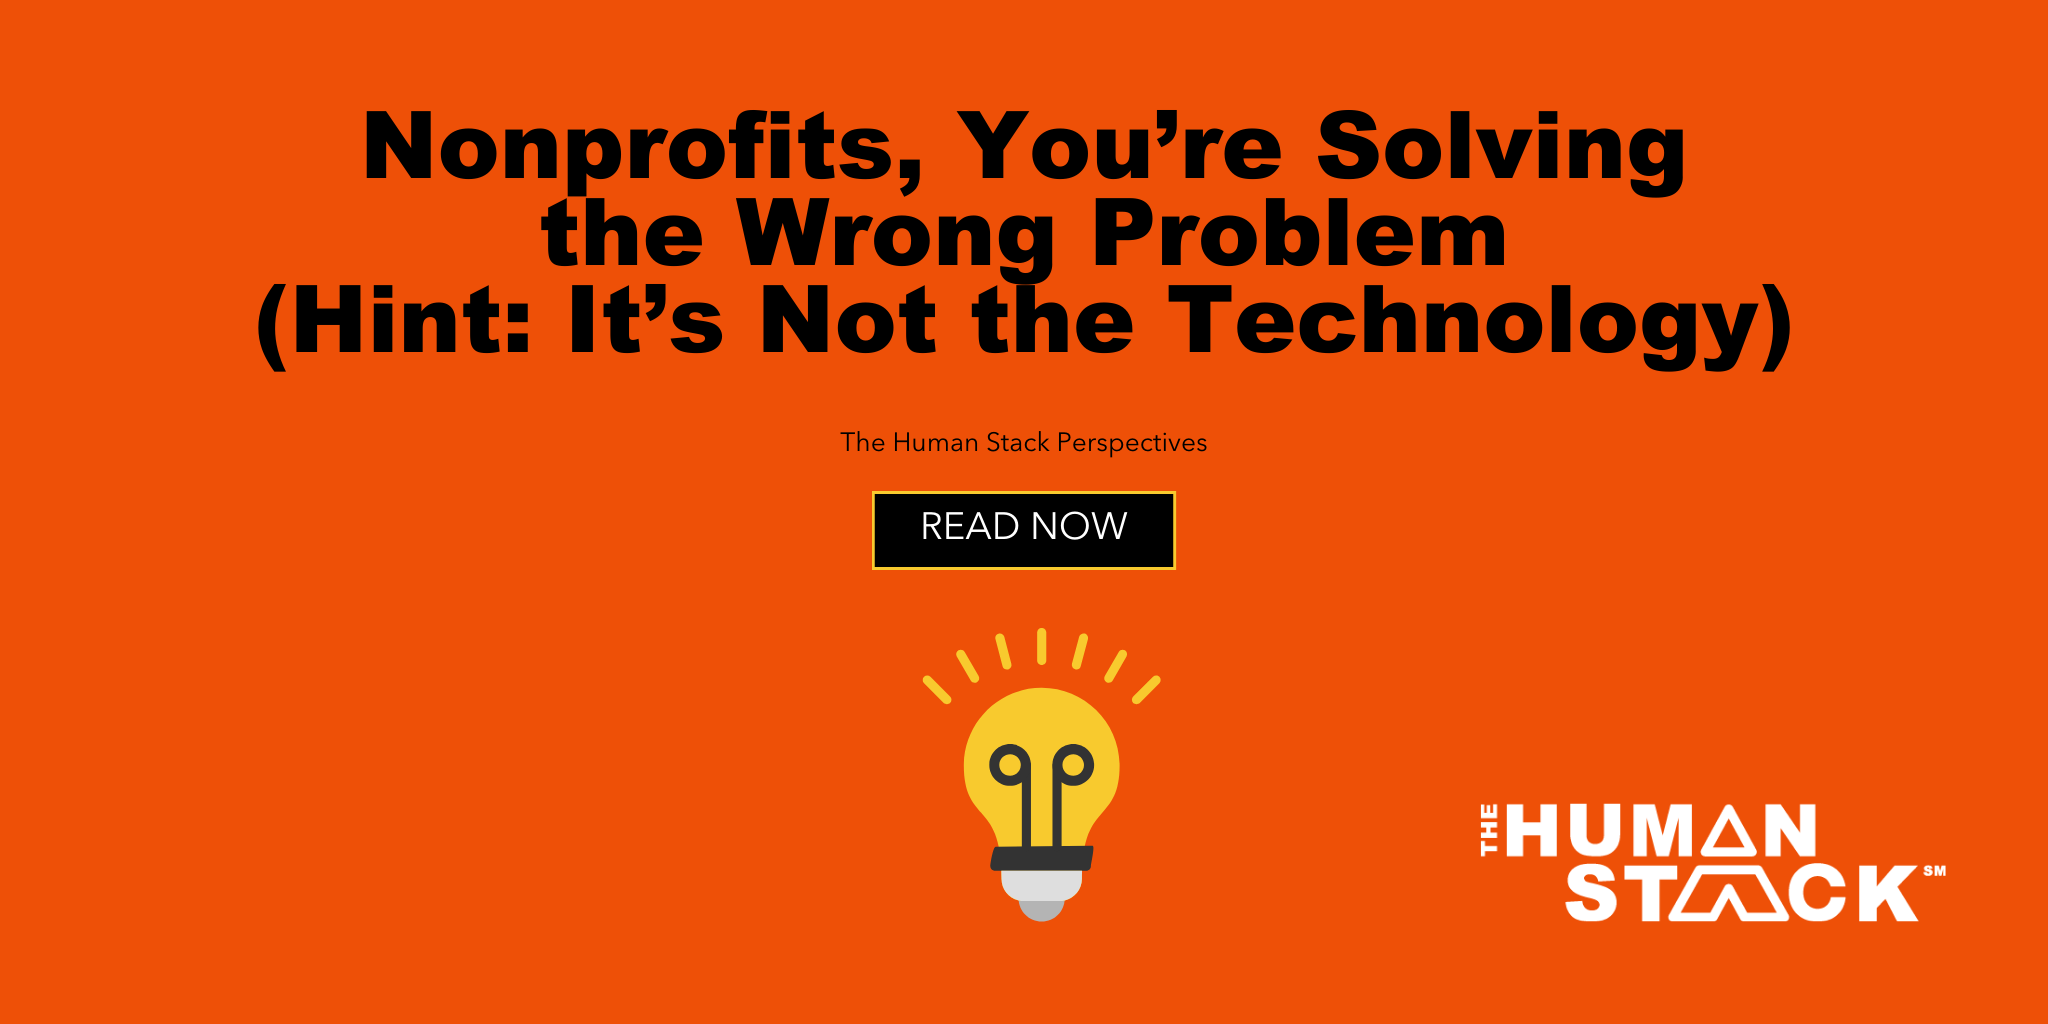 Nonprofits, You’re Solving the Wrong Problem (Hint: It’s Not the Technology)